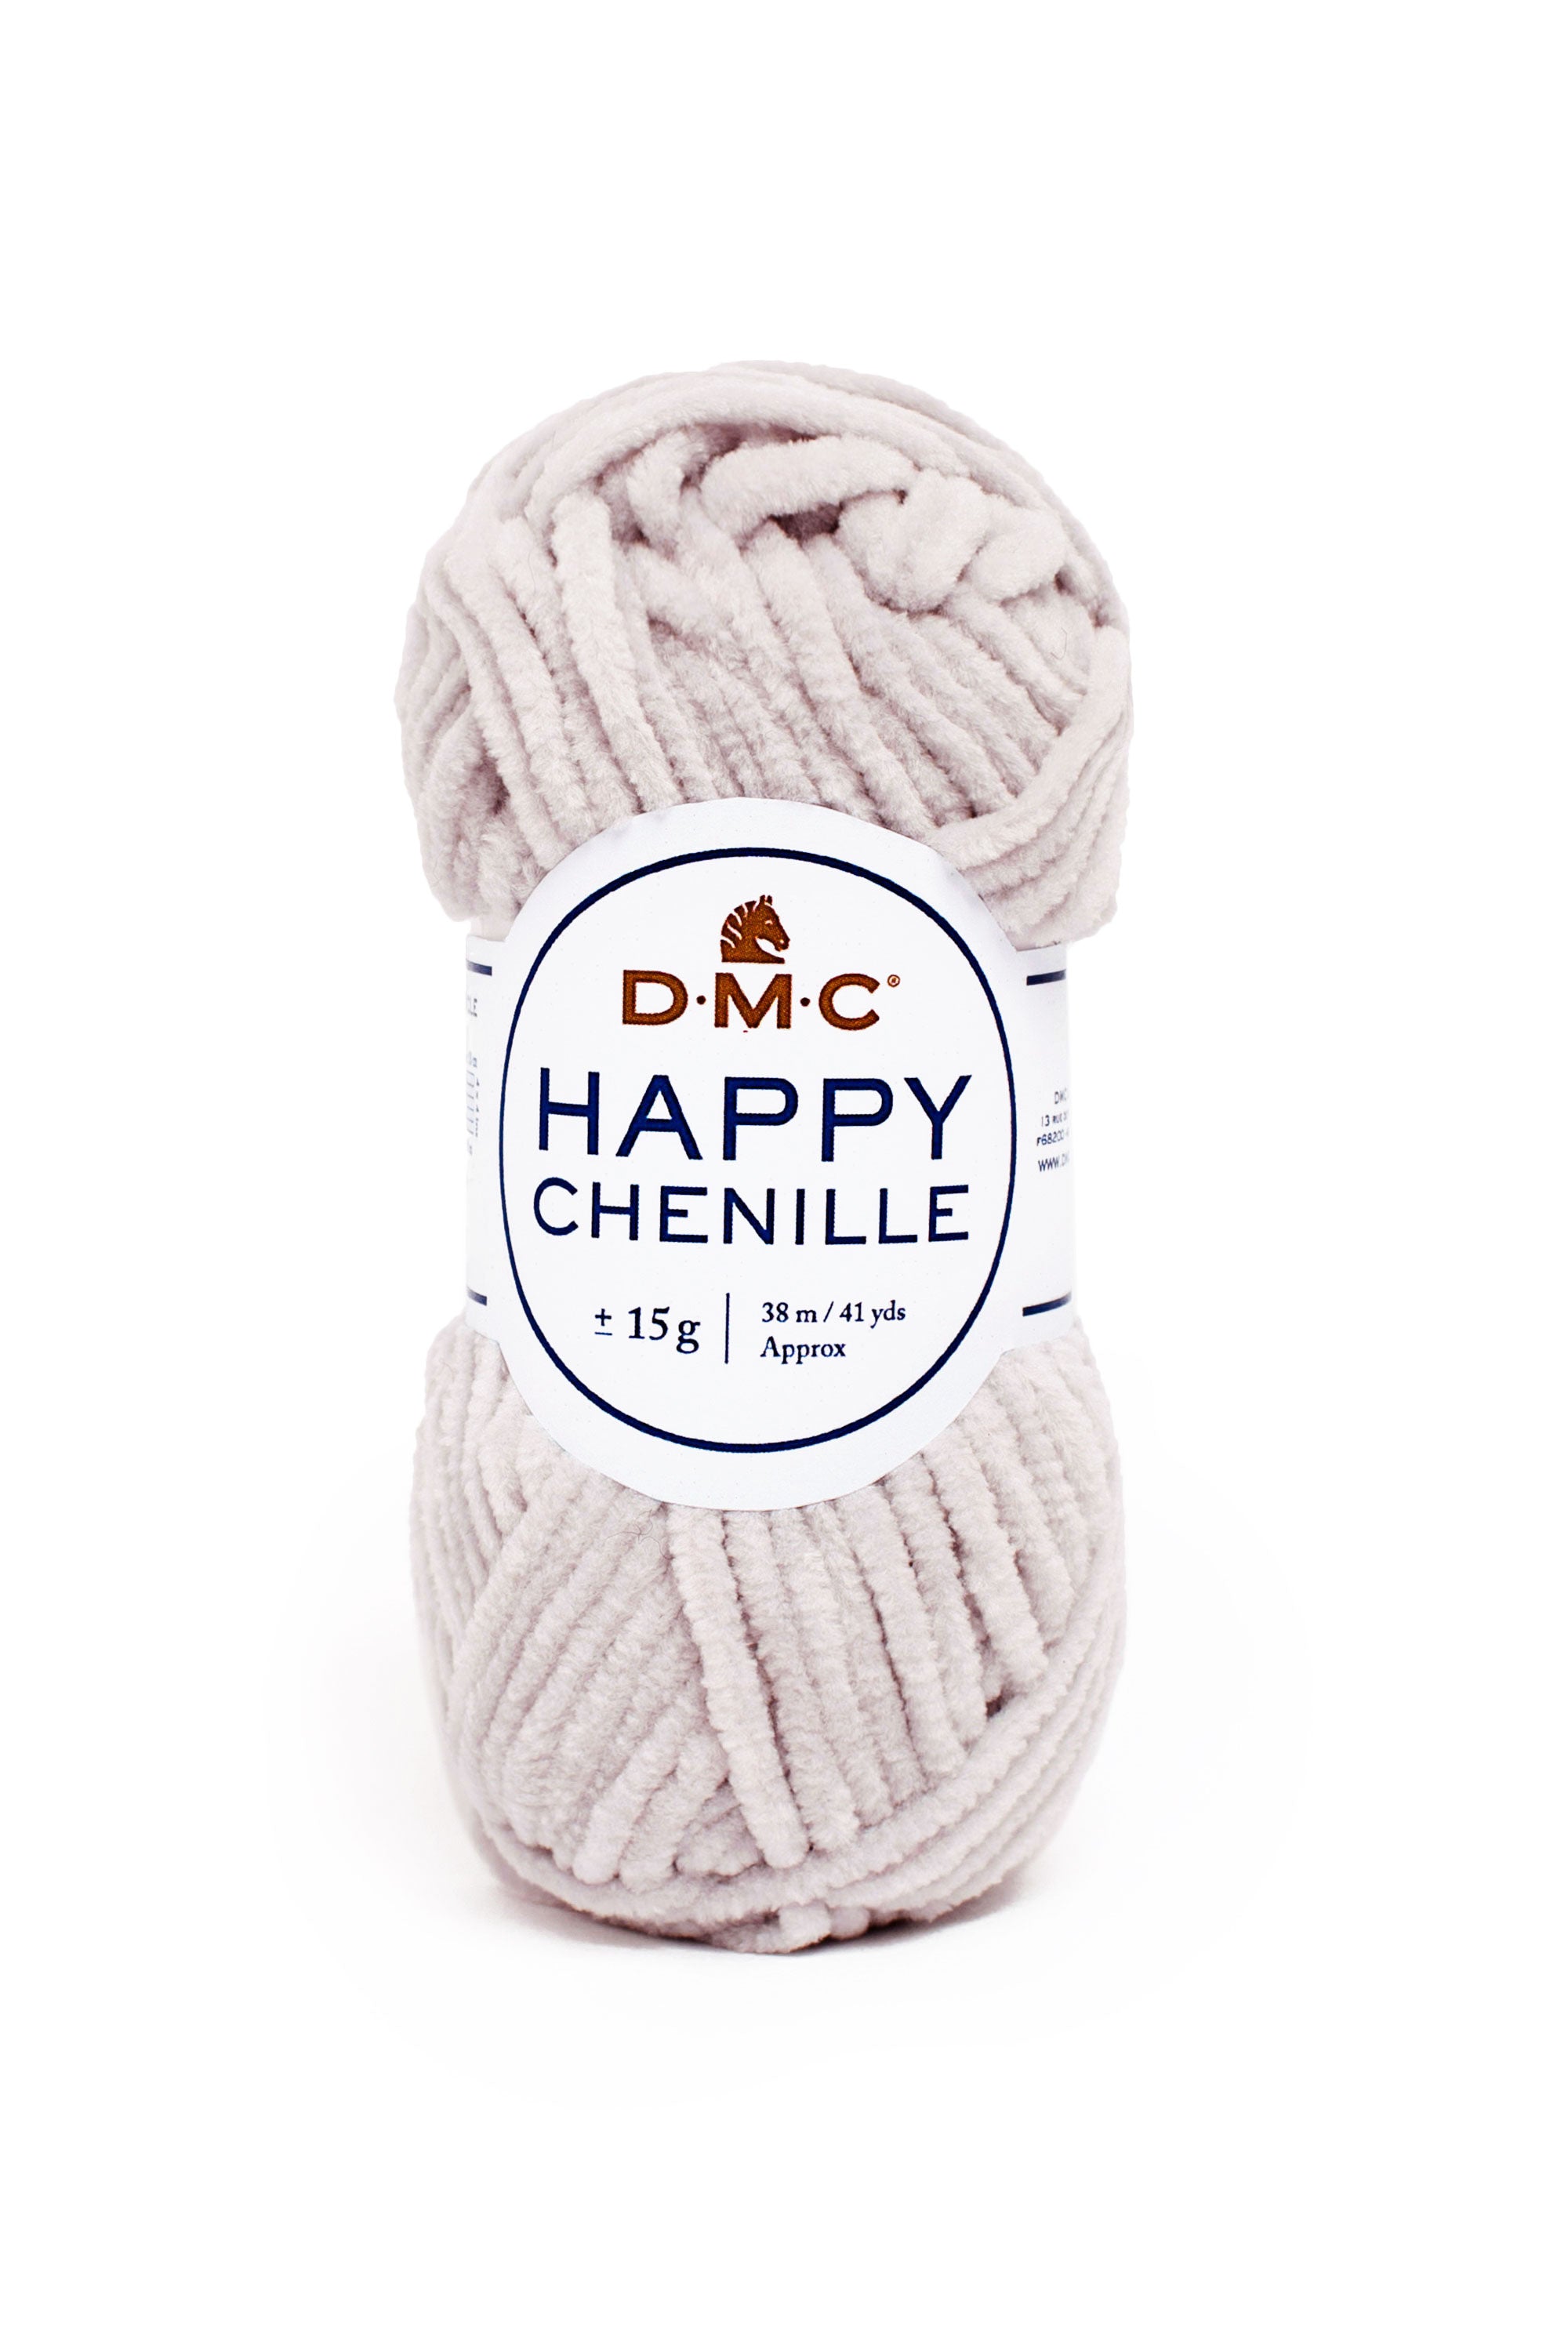 DMC Happy Chenille - Velvet Yarn for Adorable Projects